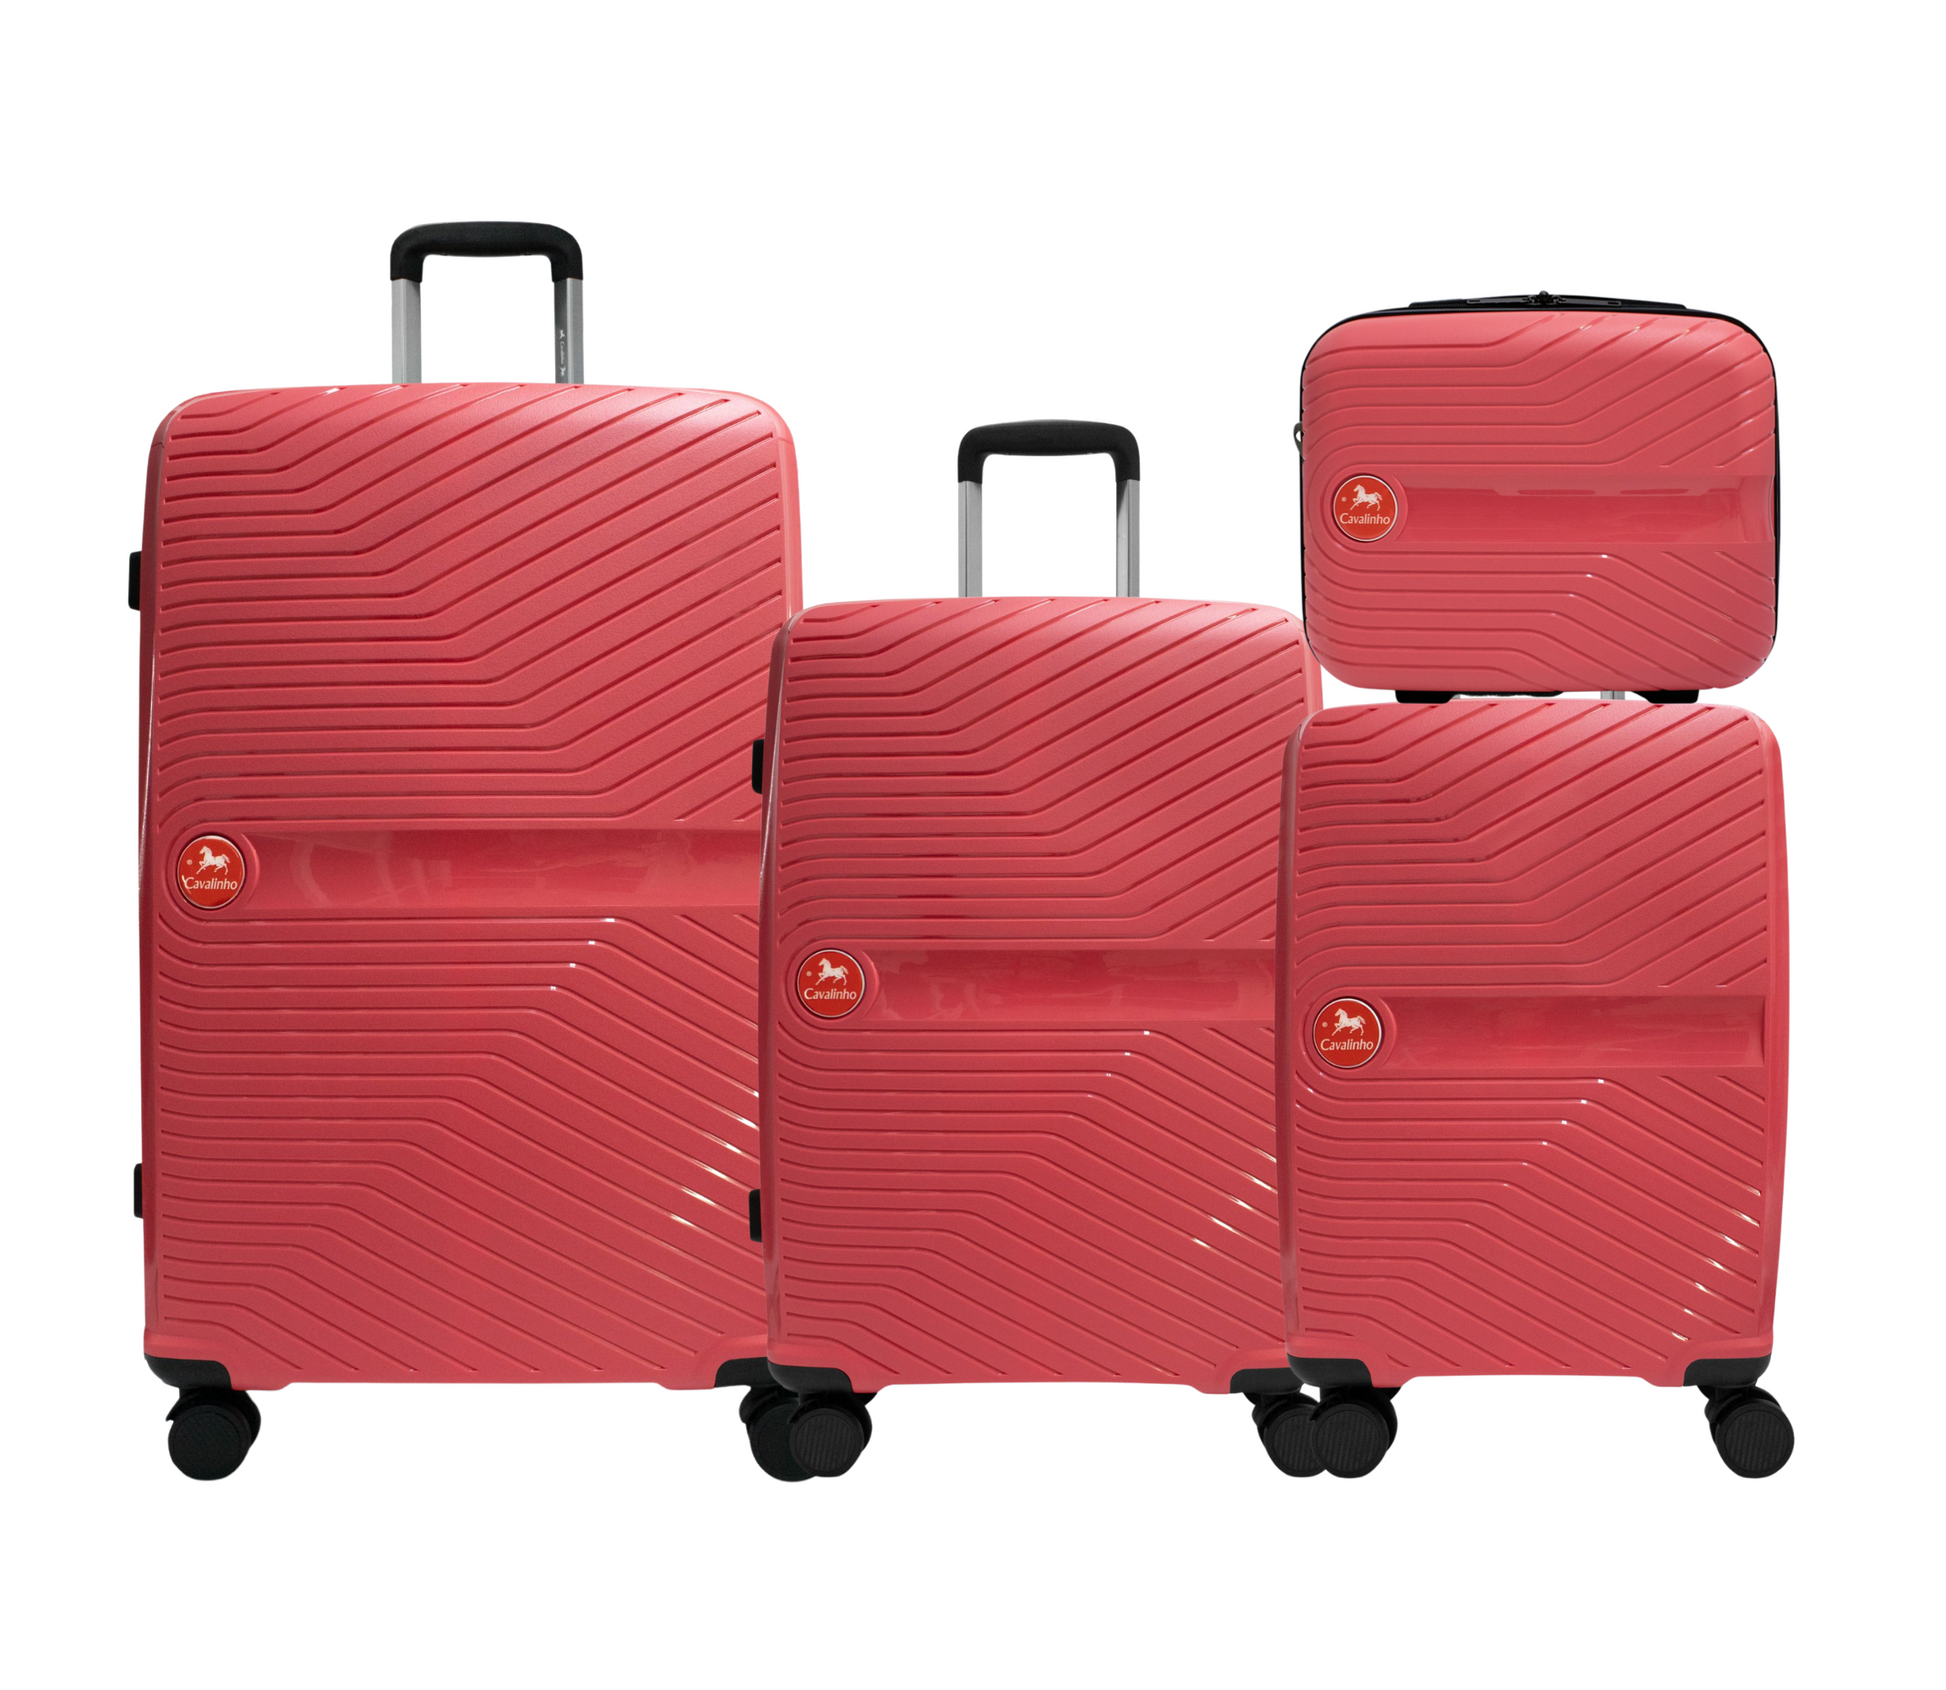 #color_ Coral | Cavalinho Canada & USA 4 Piece Set of Colorful Hardside Luggage (15", 19", 24", 28") - Coral - 68020004.27.S4_1